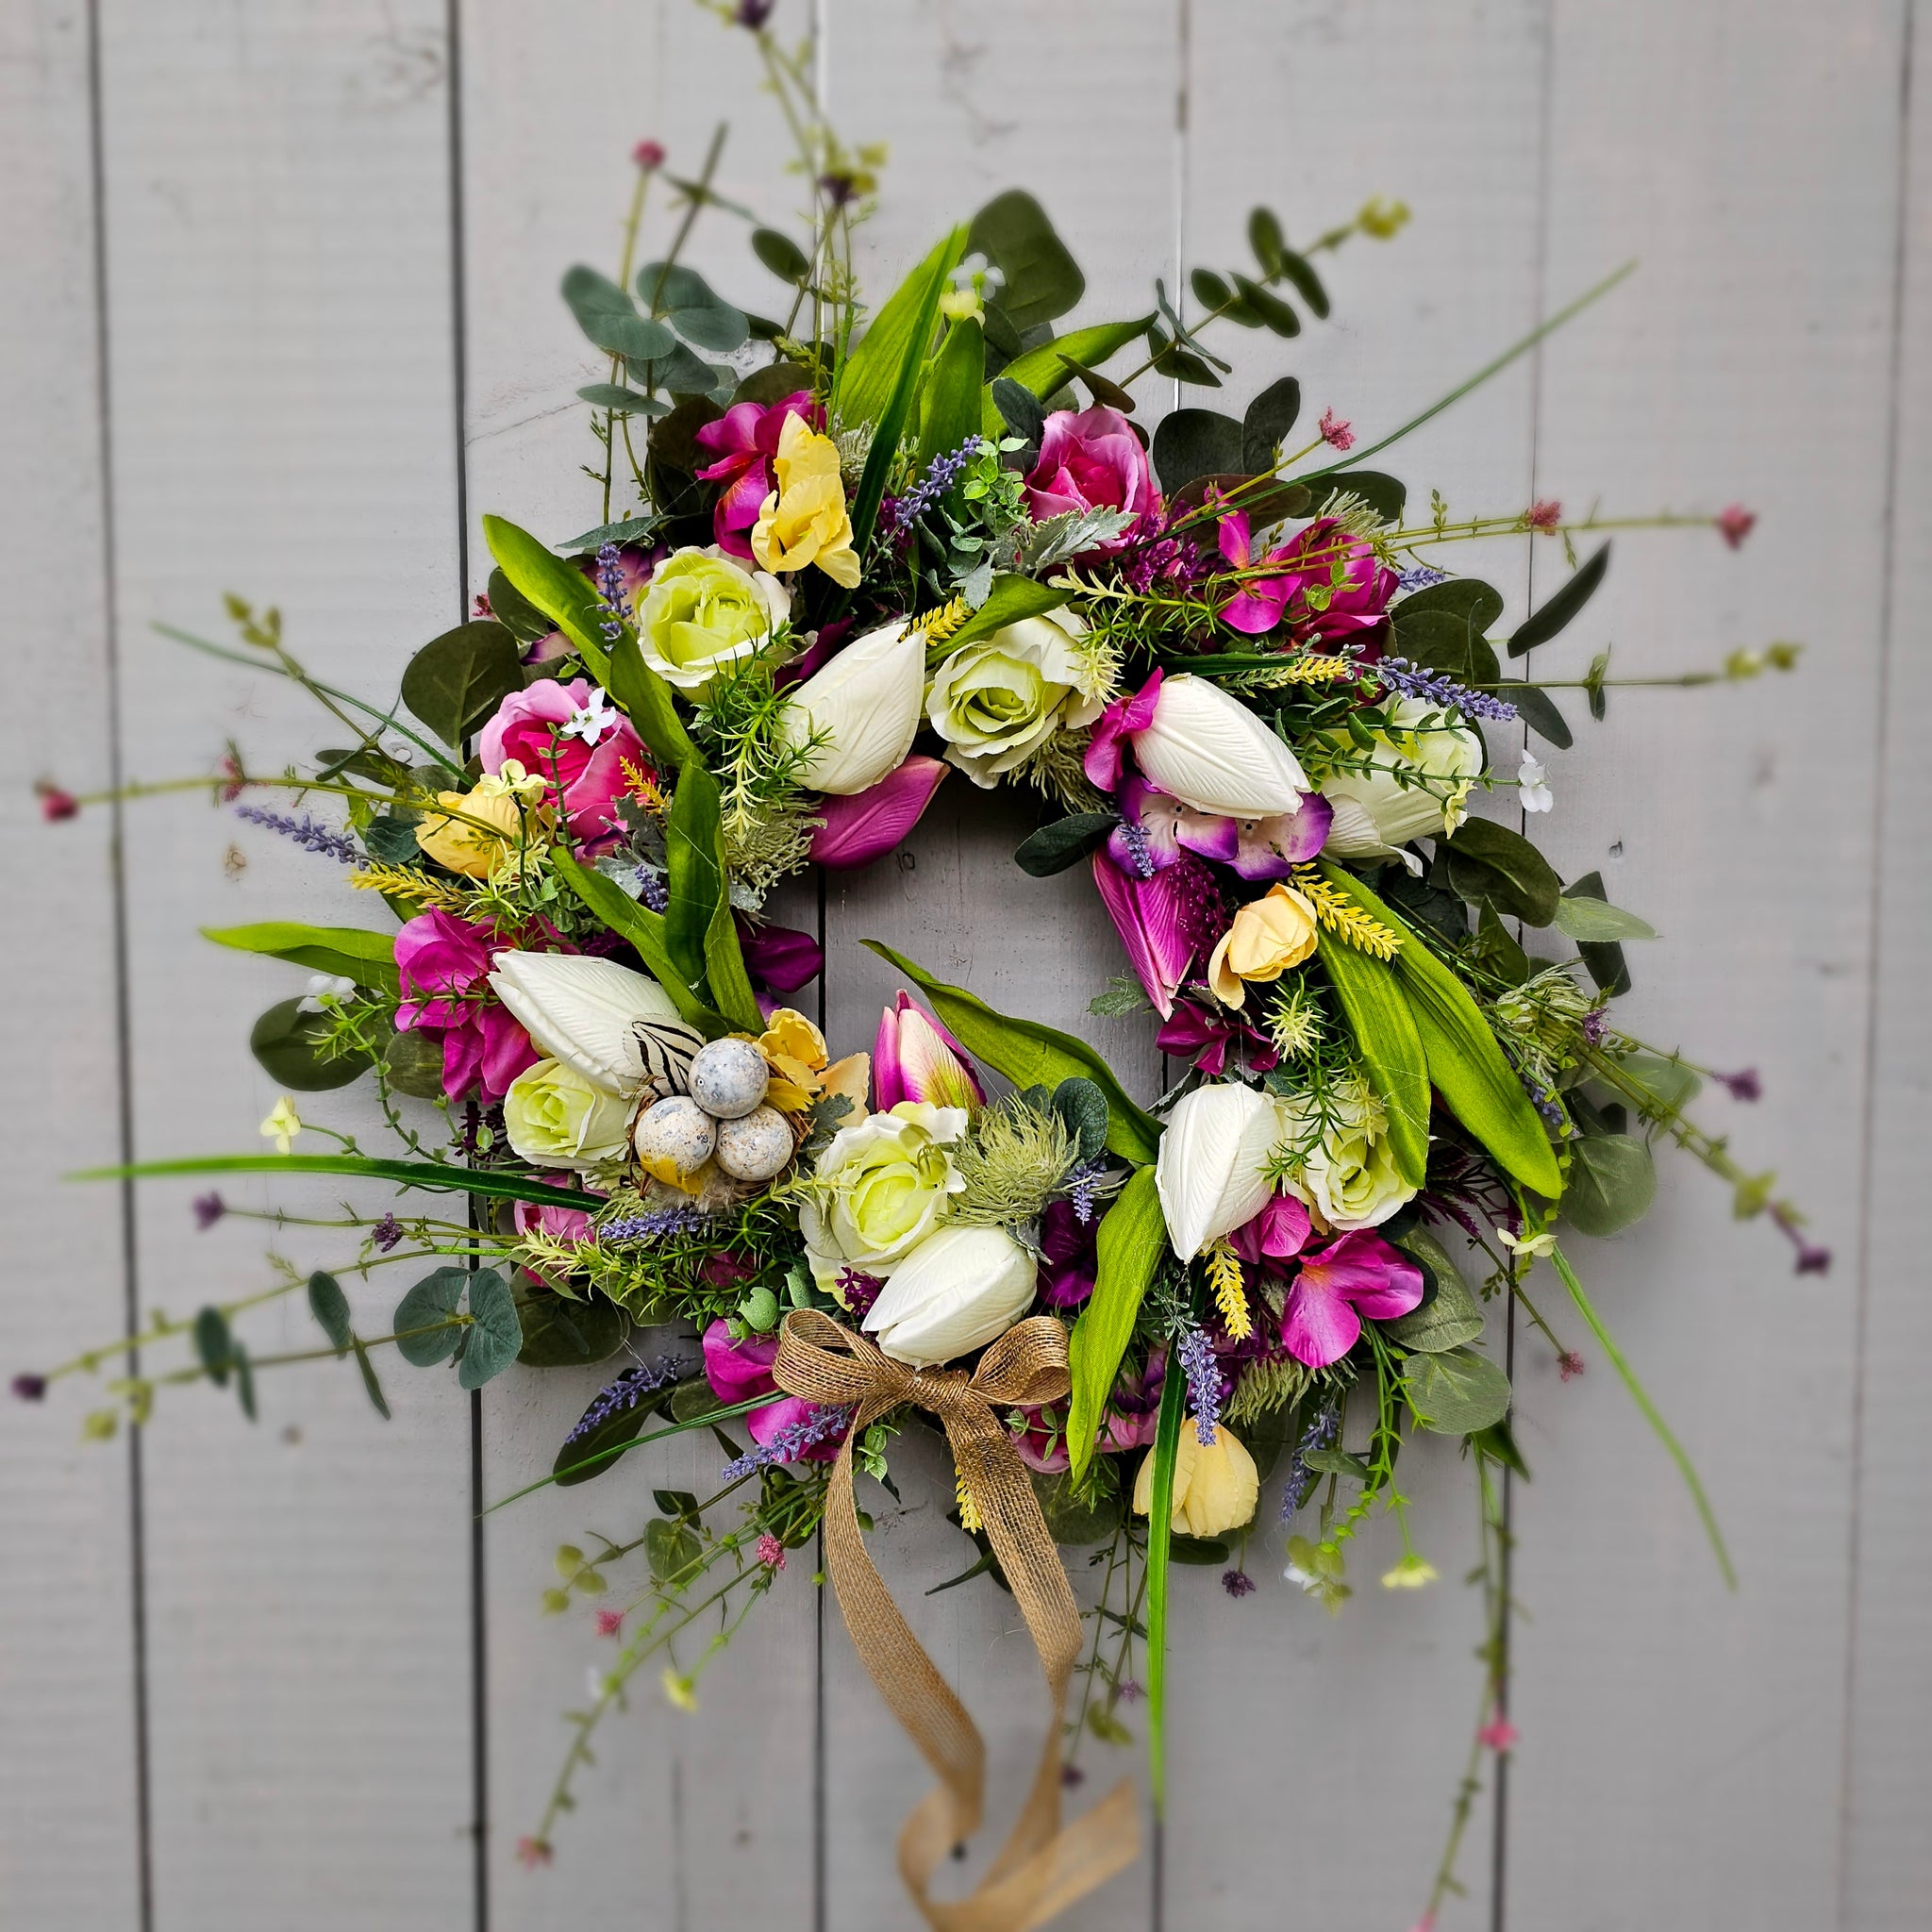 The Easter Tulips Wreath